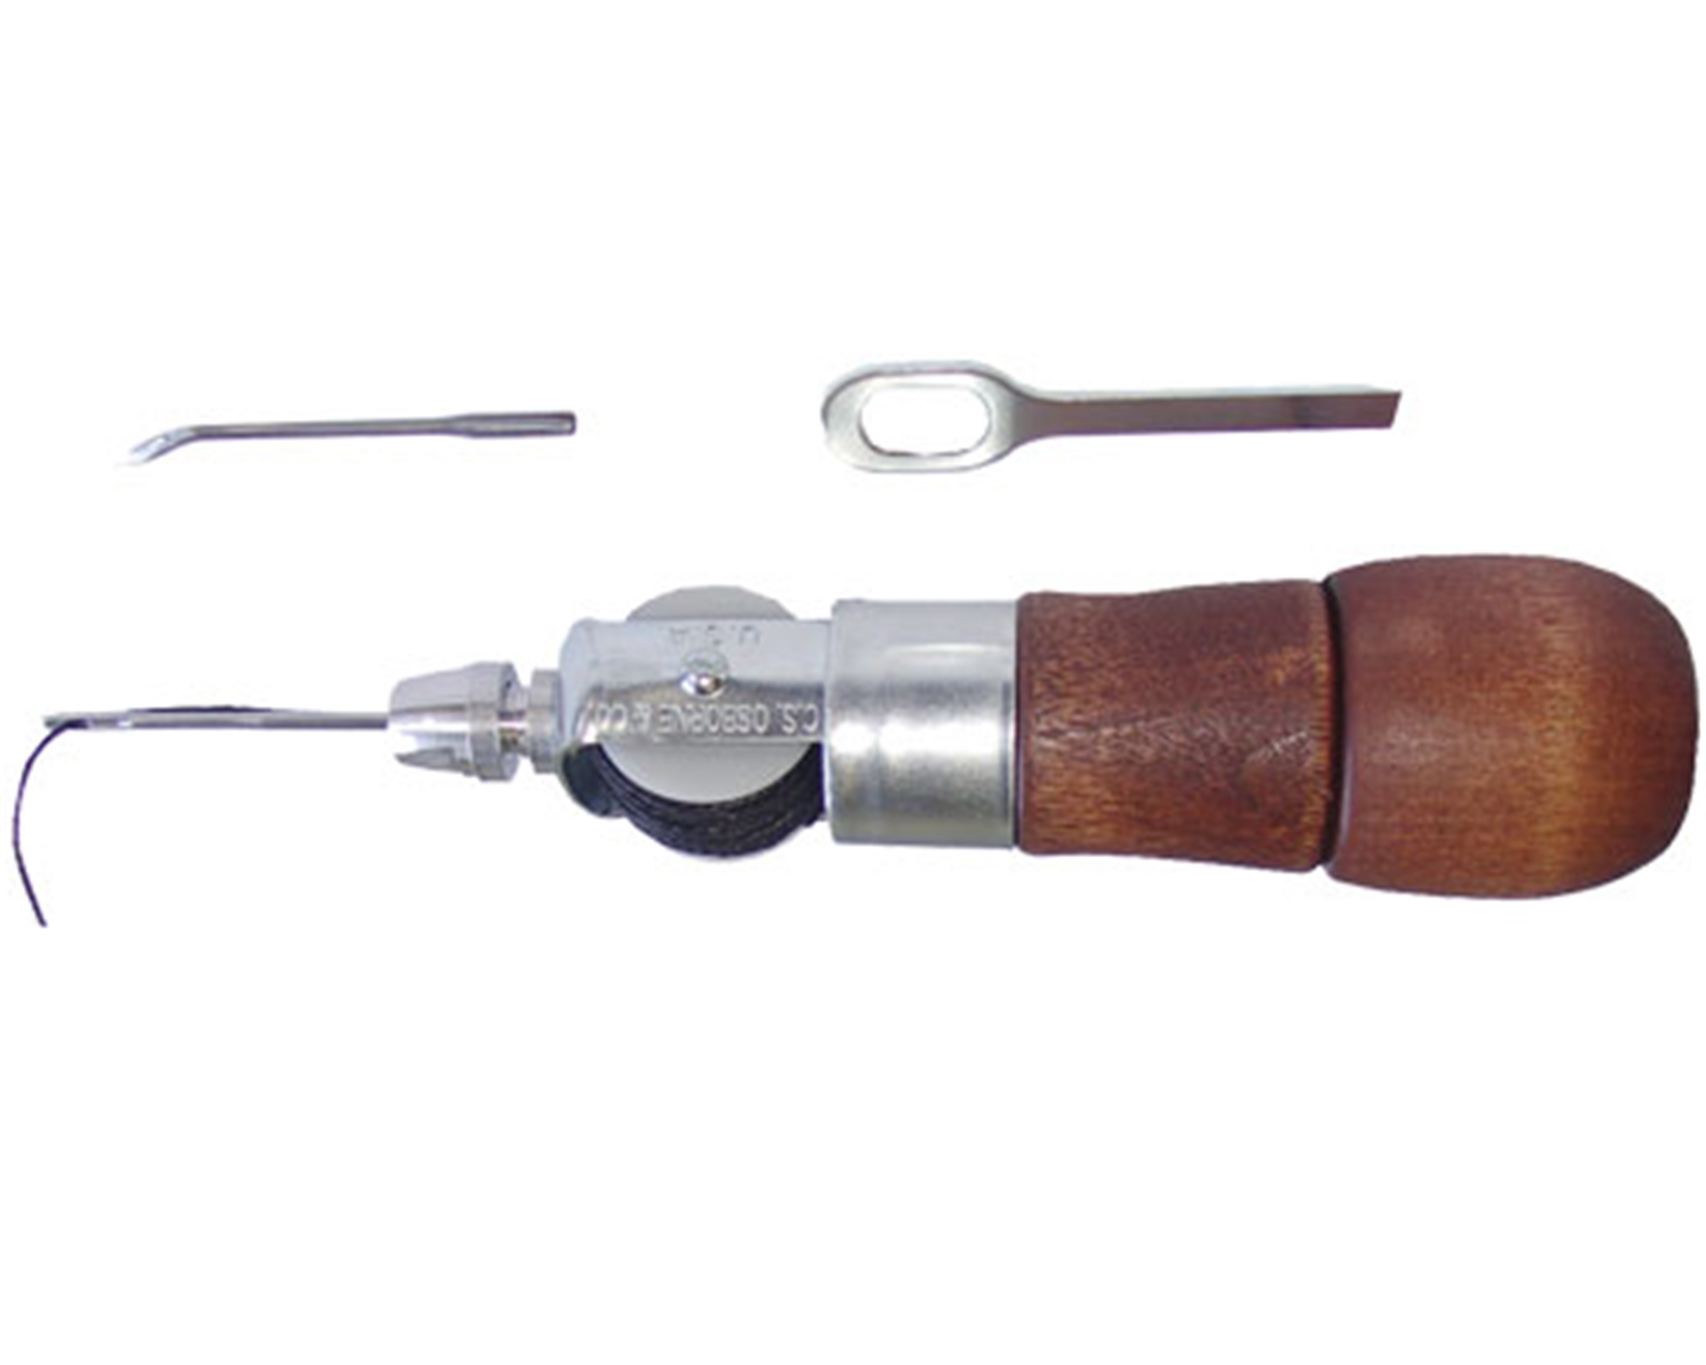 Automatic Awl For Sewing Leather, Canvas & Similar